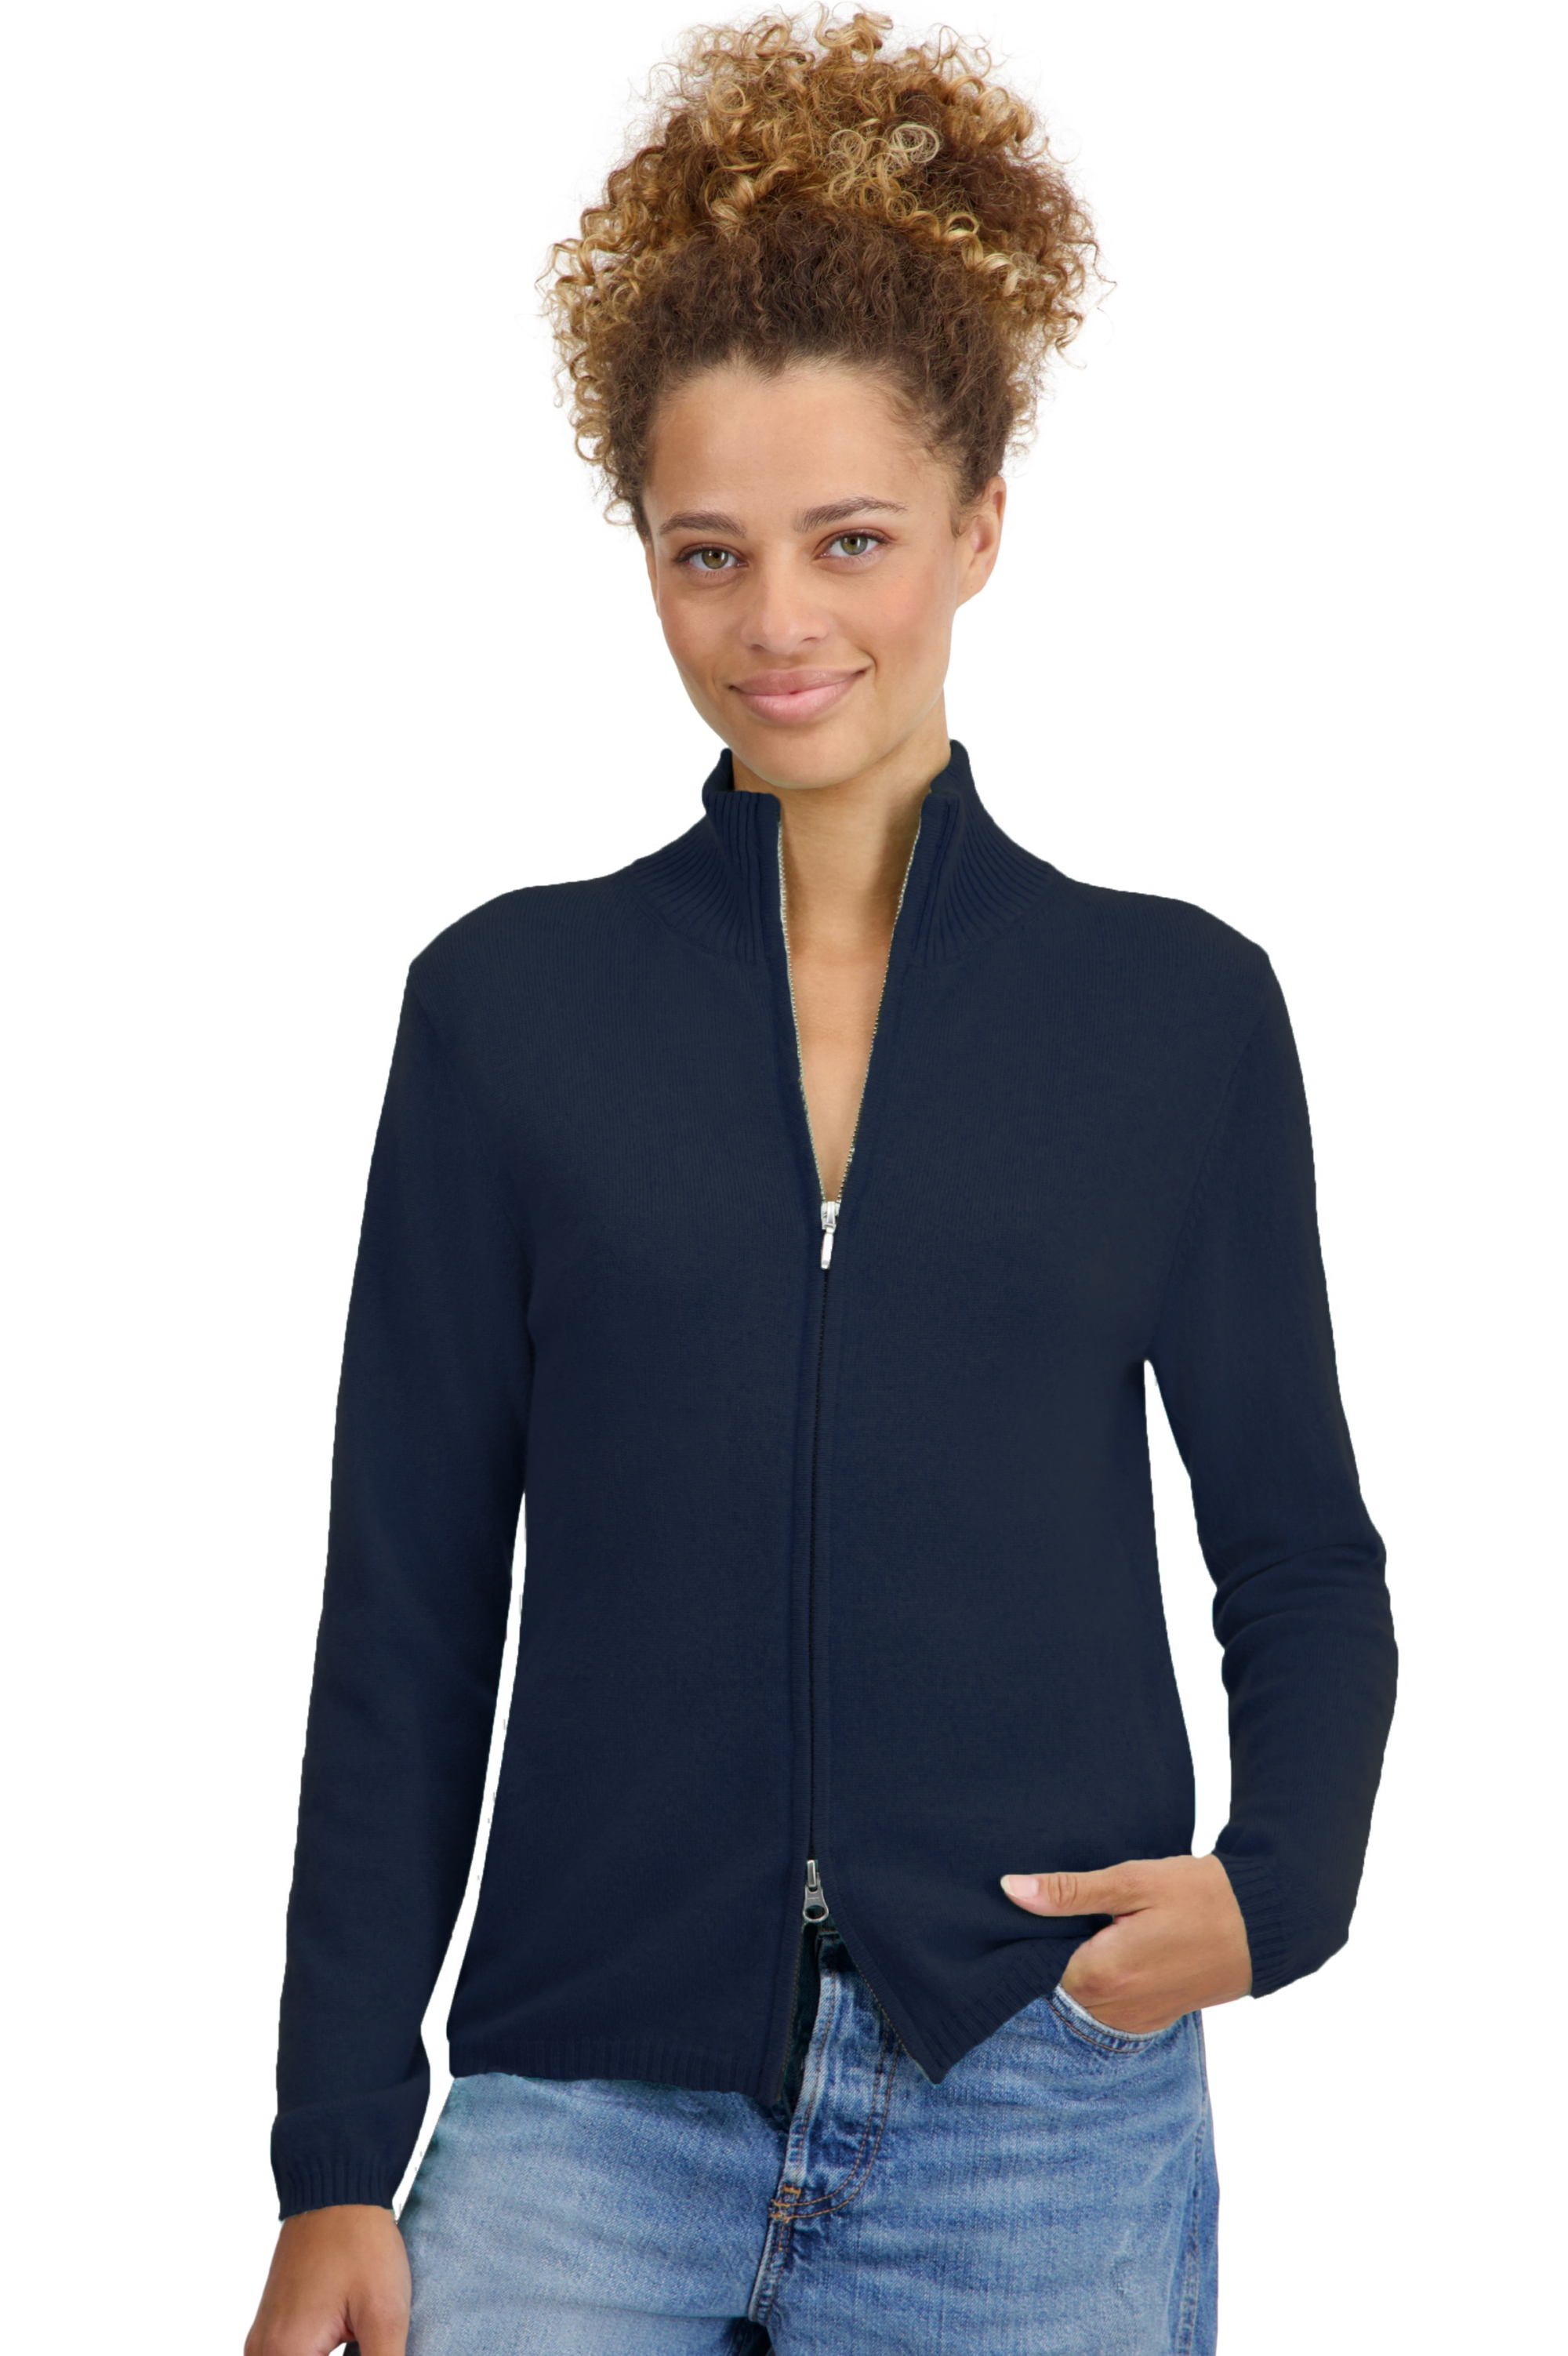 Cachemire pull femme zip capuche thames first marine fonce m